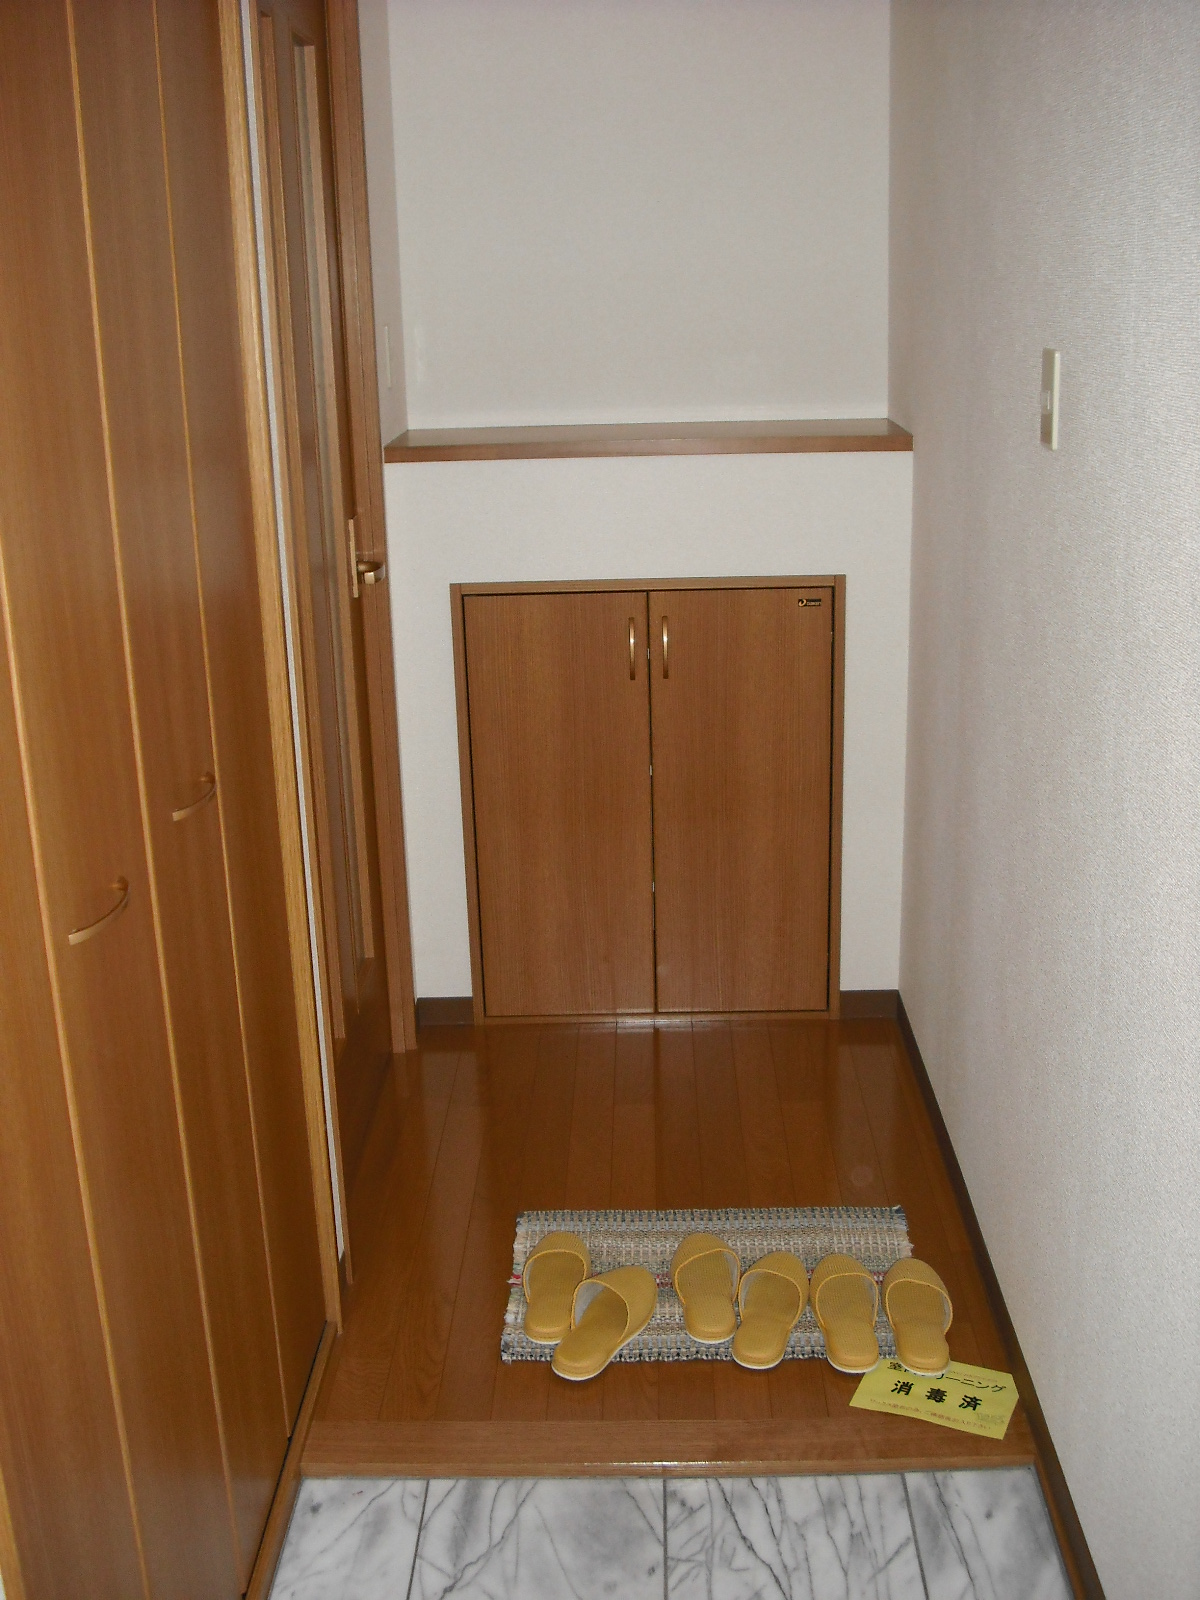 Entrance. There is also a separate storage and cupboard in the entrance hall